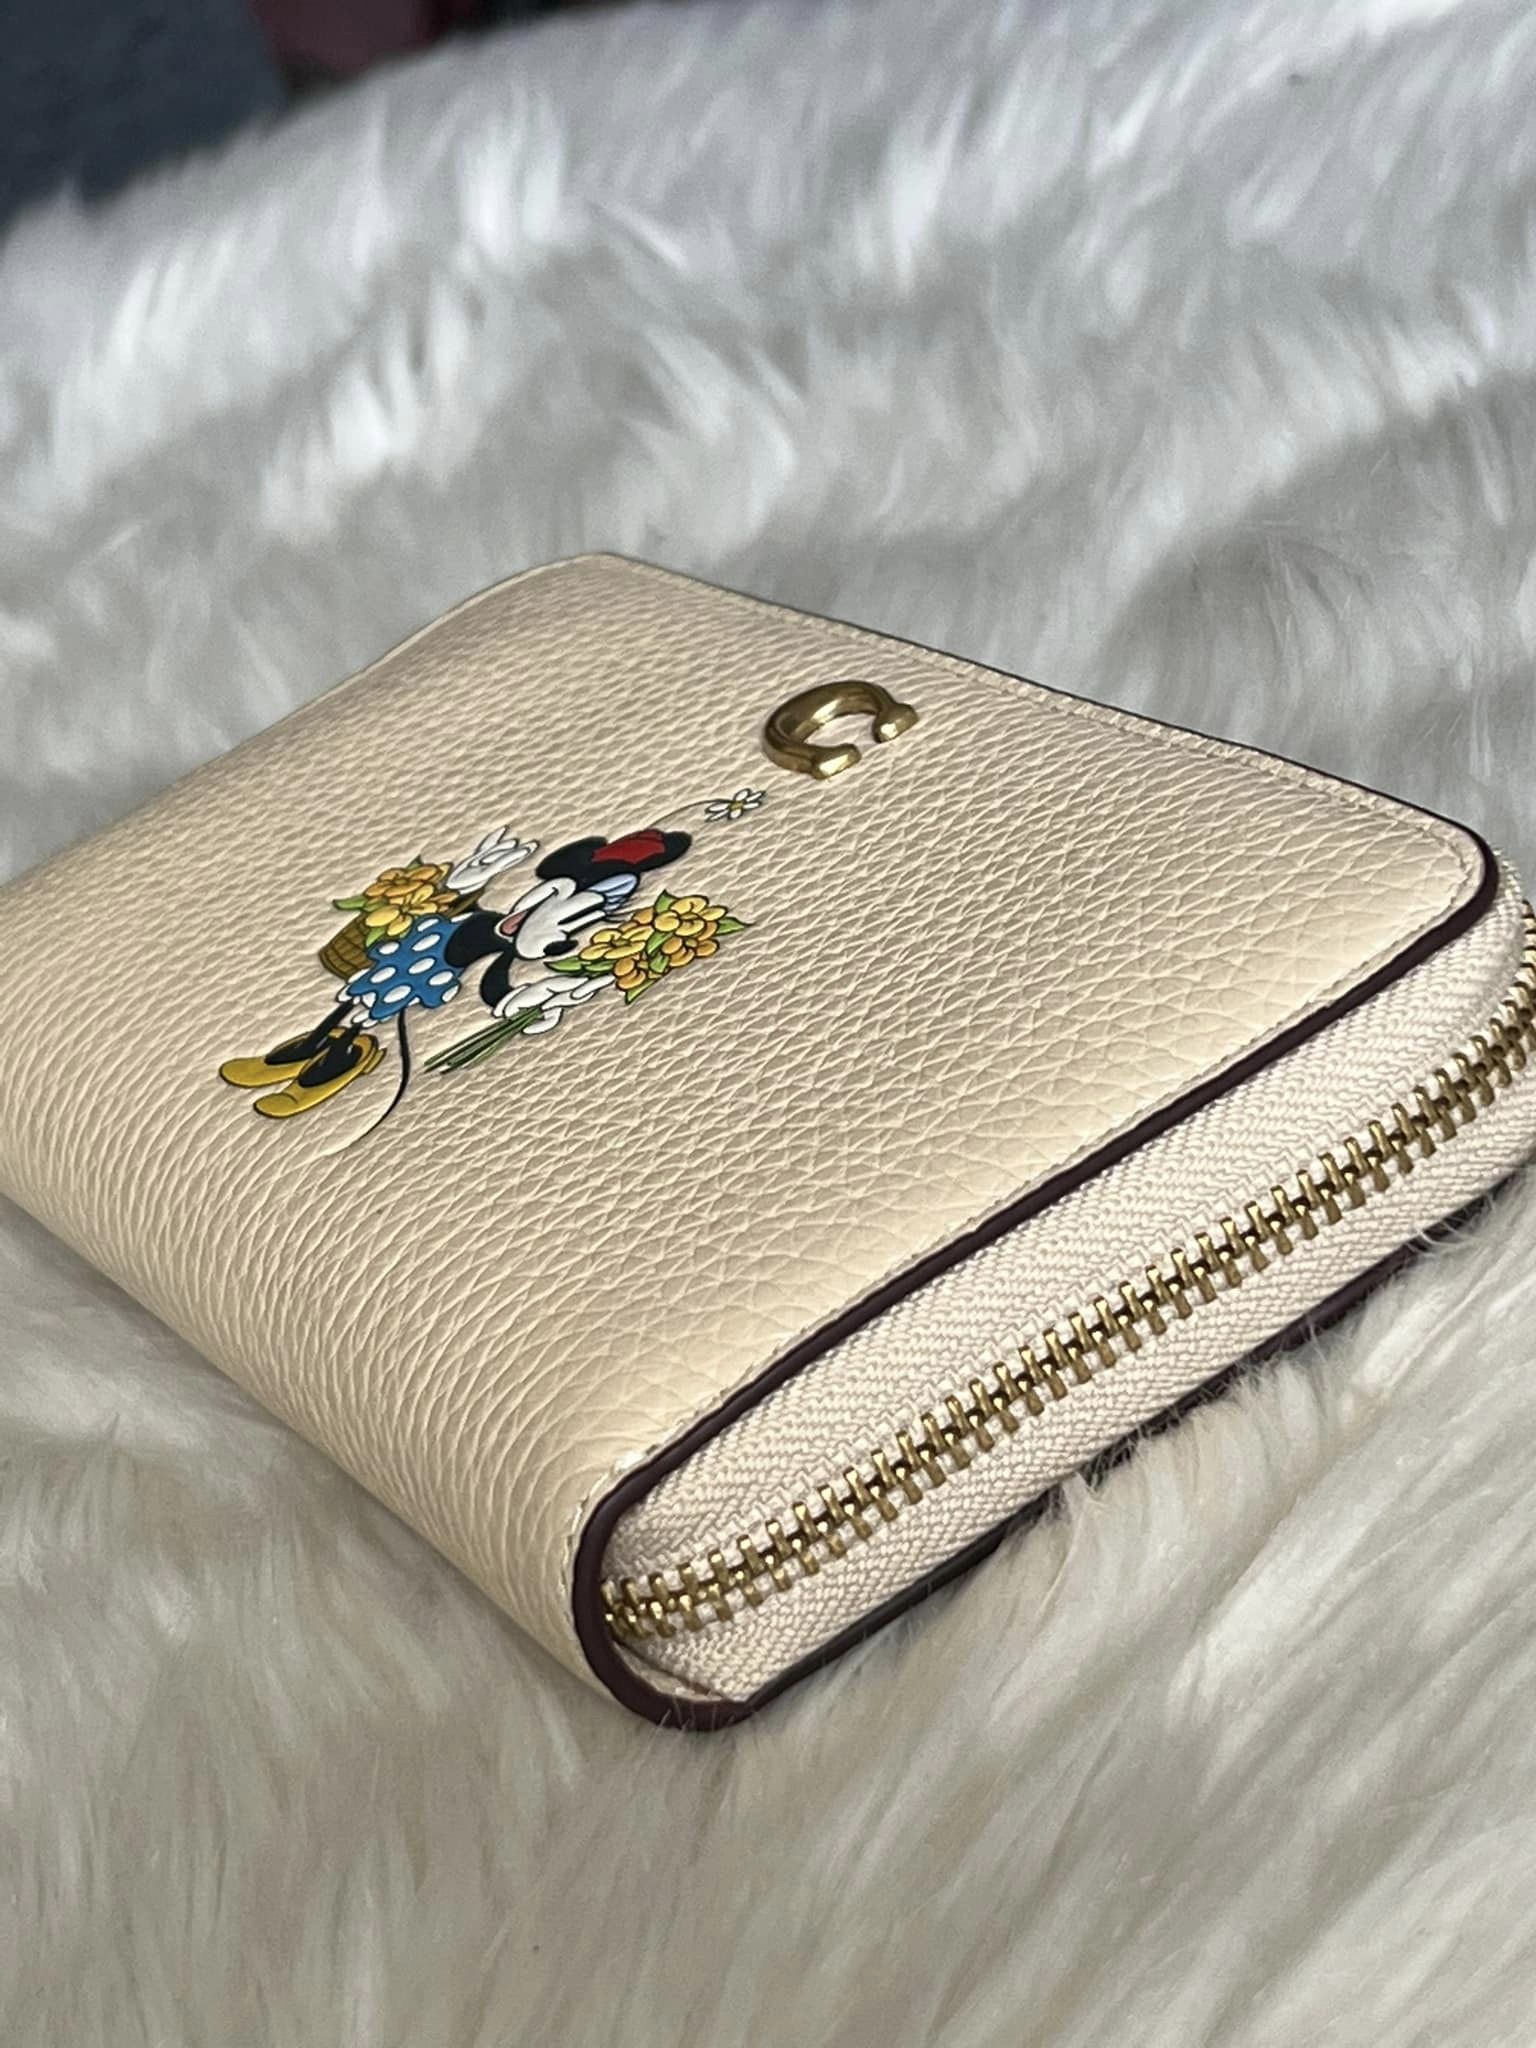 Disney X Coach Accordion Zip Wallet with Minnie Mouse in